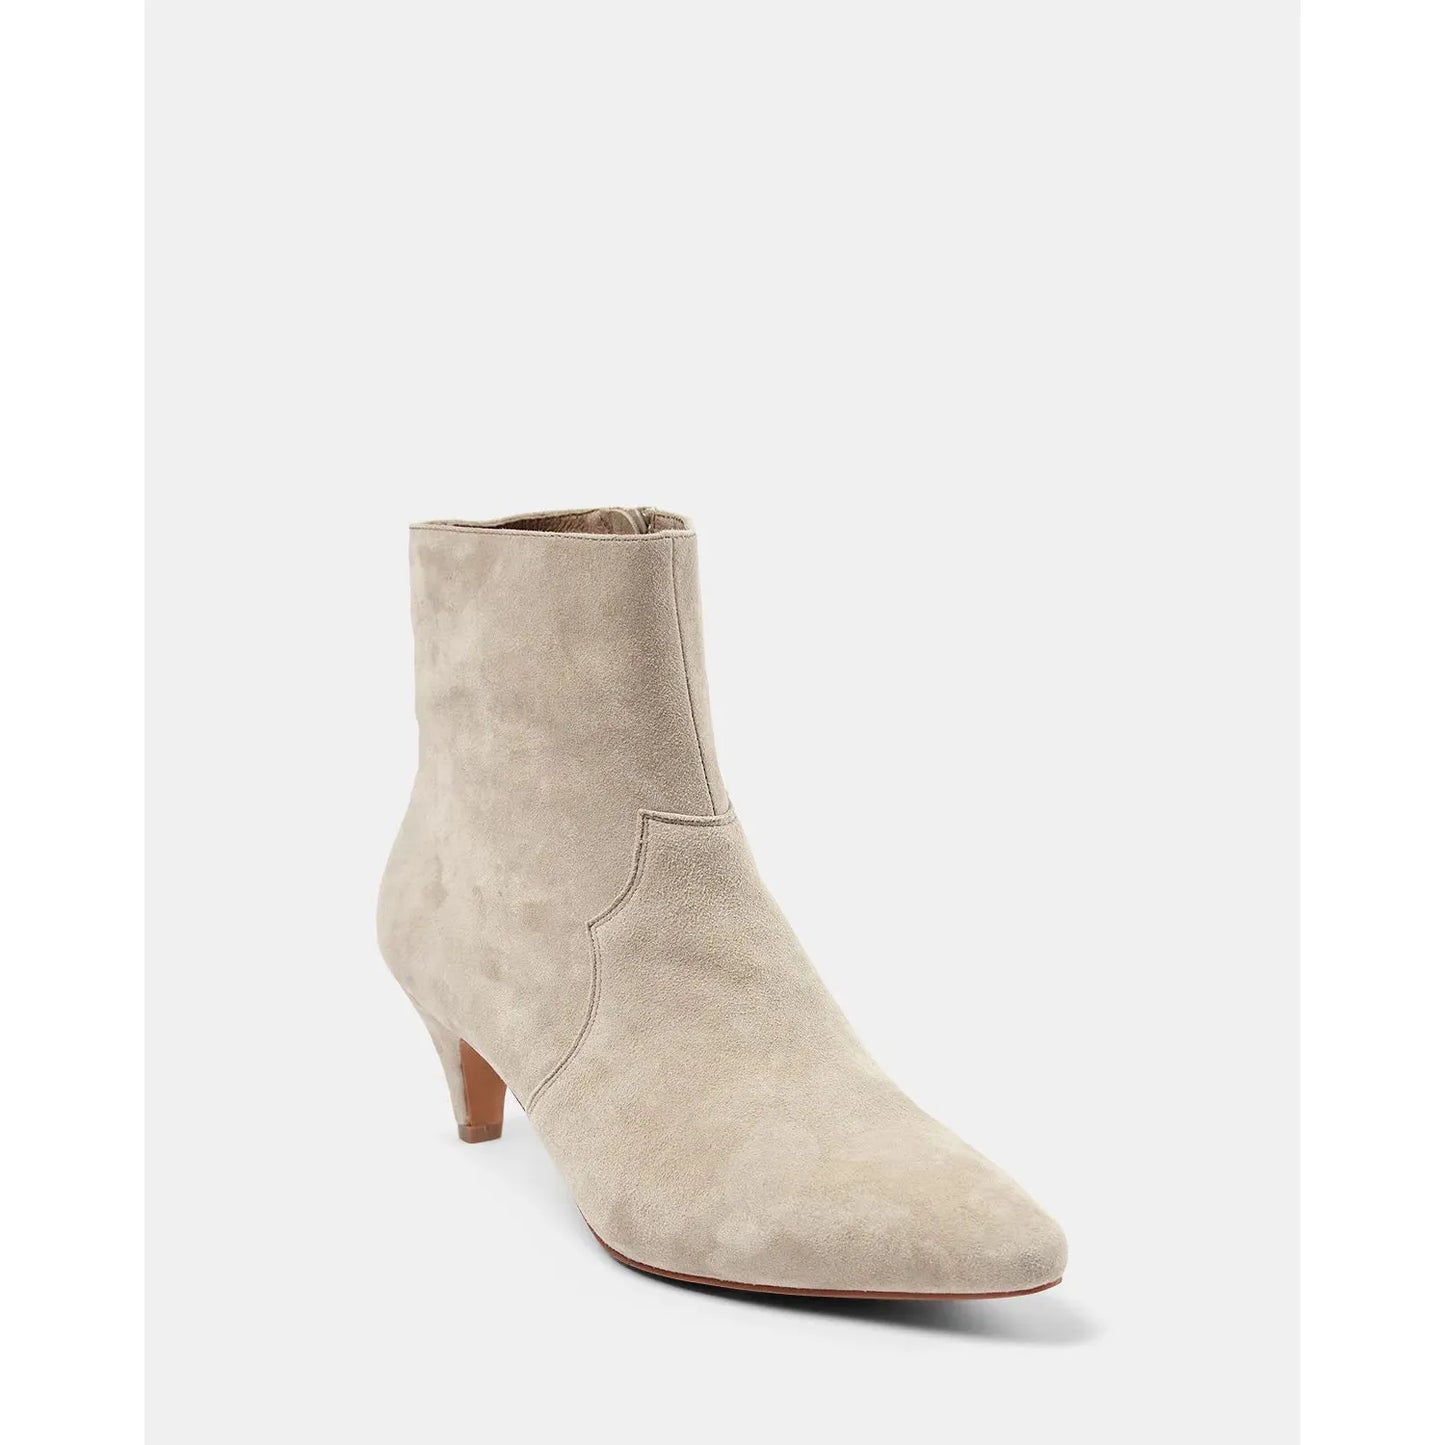 SUEDE BOOT